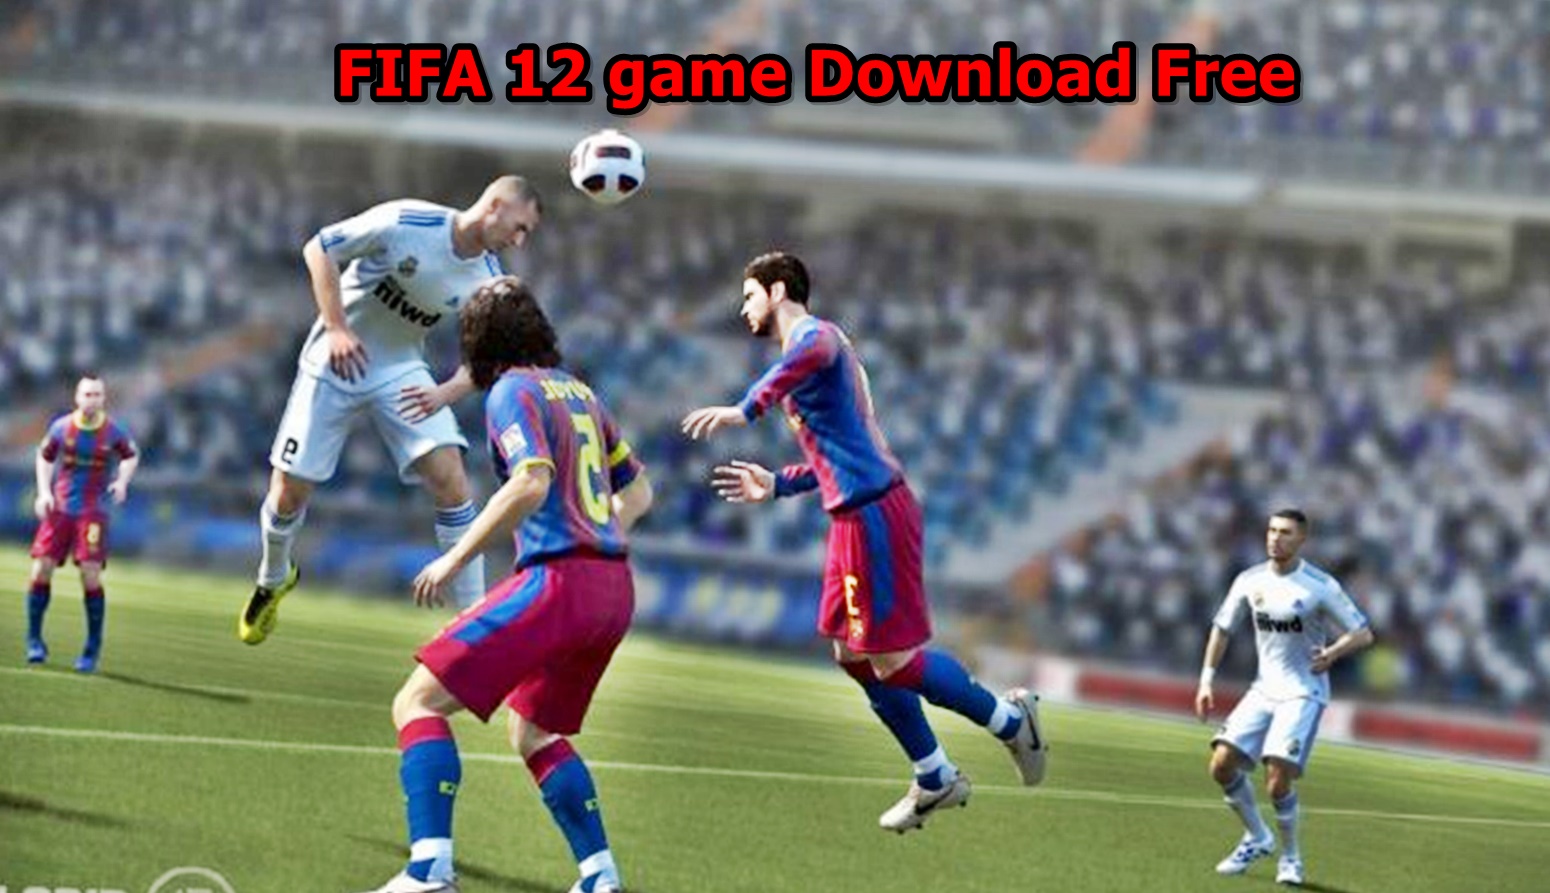 fifa games online download free